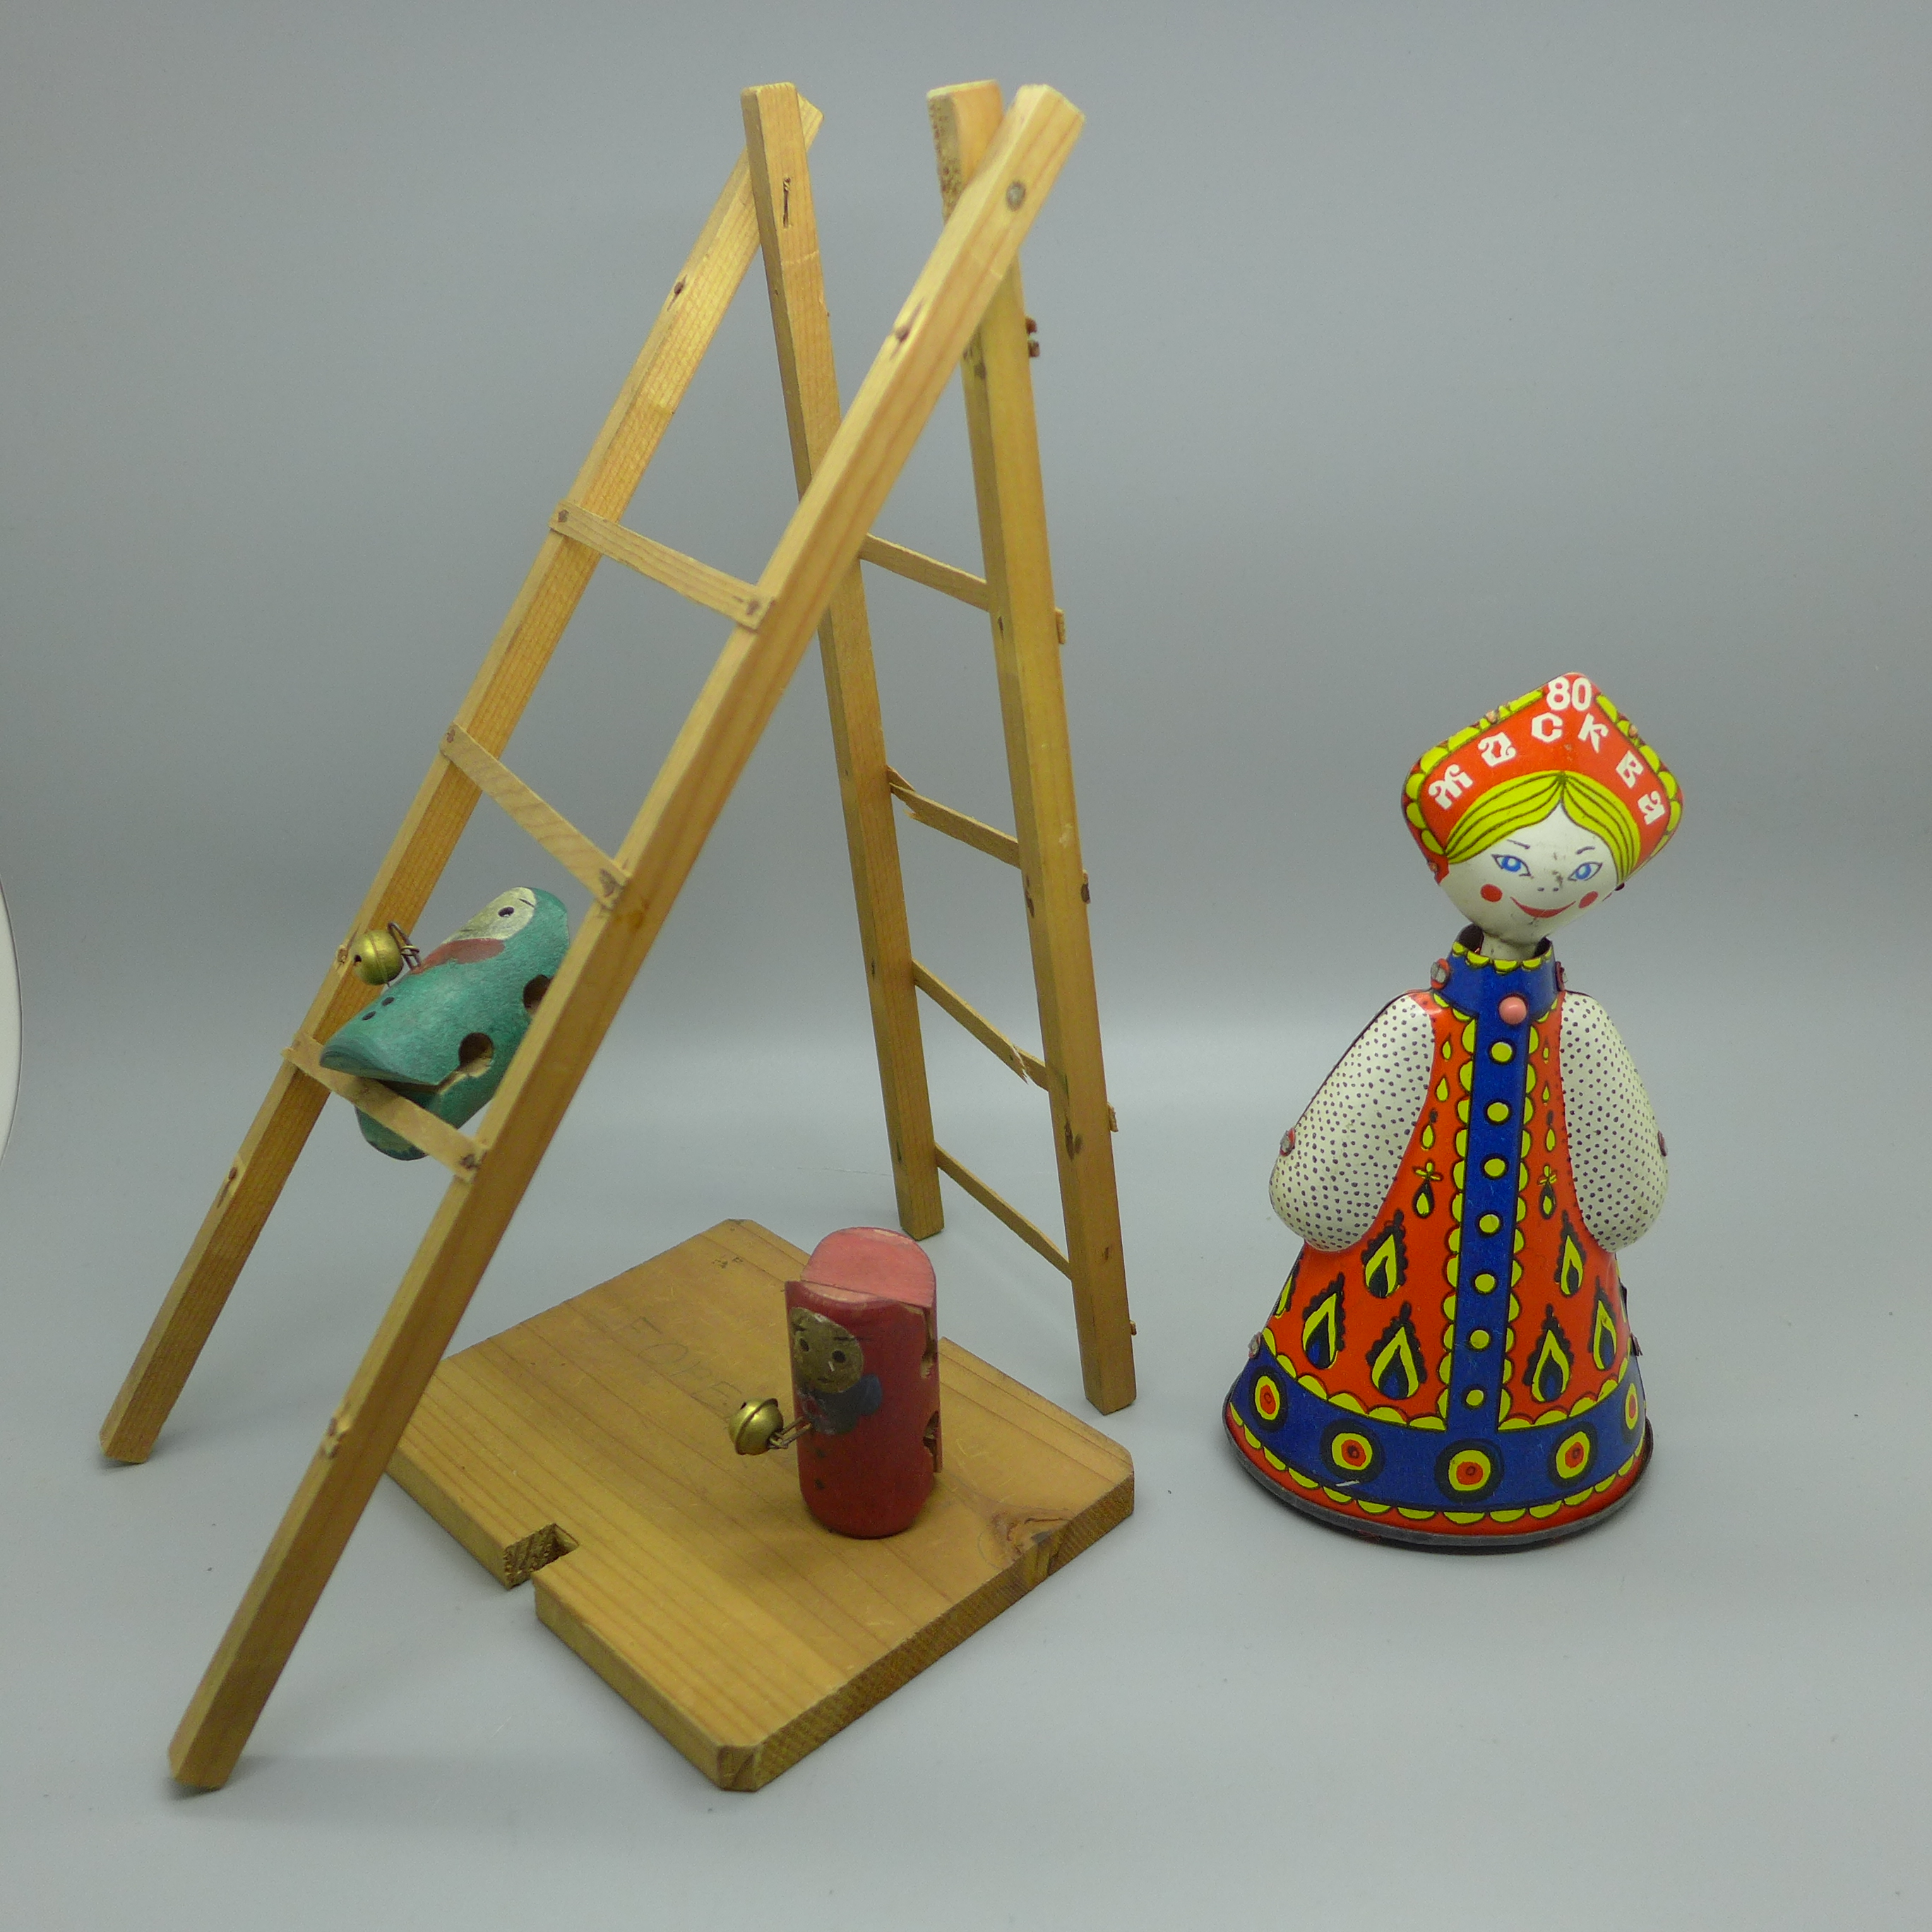 A clockwork Russian doll (no key) and a vintage wooden toy